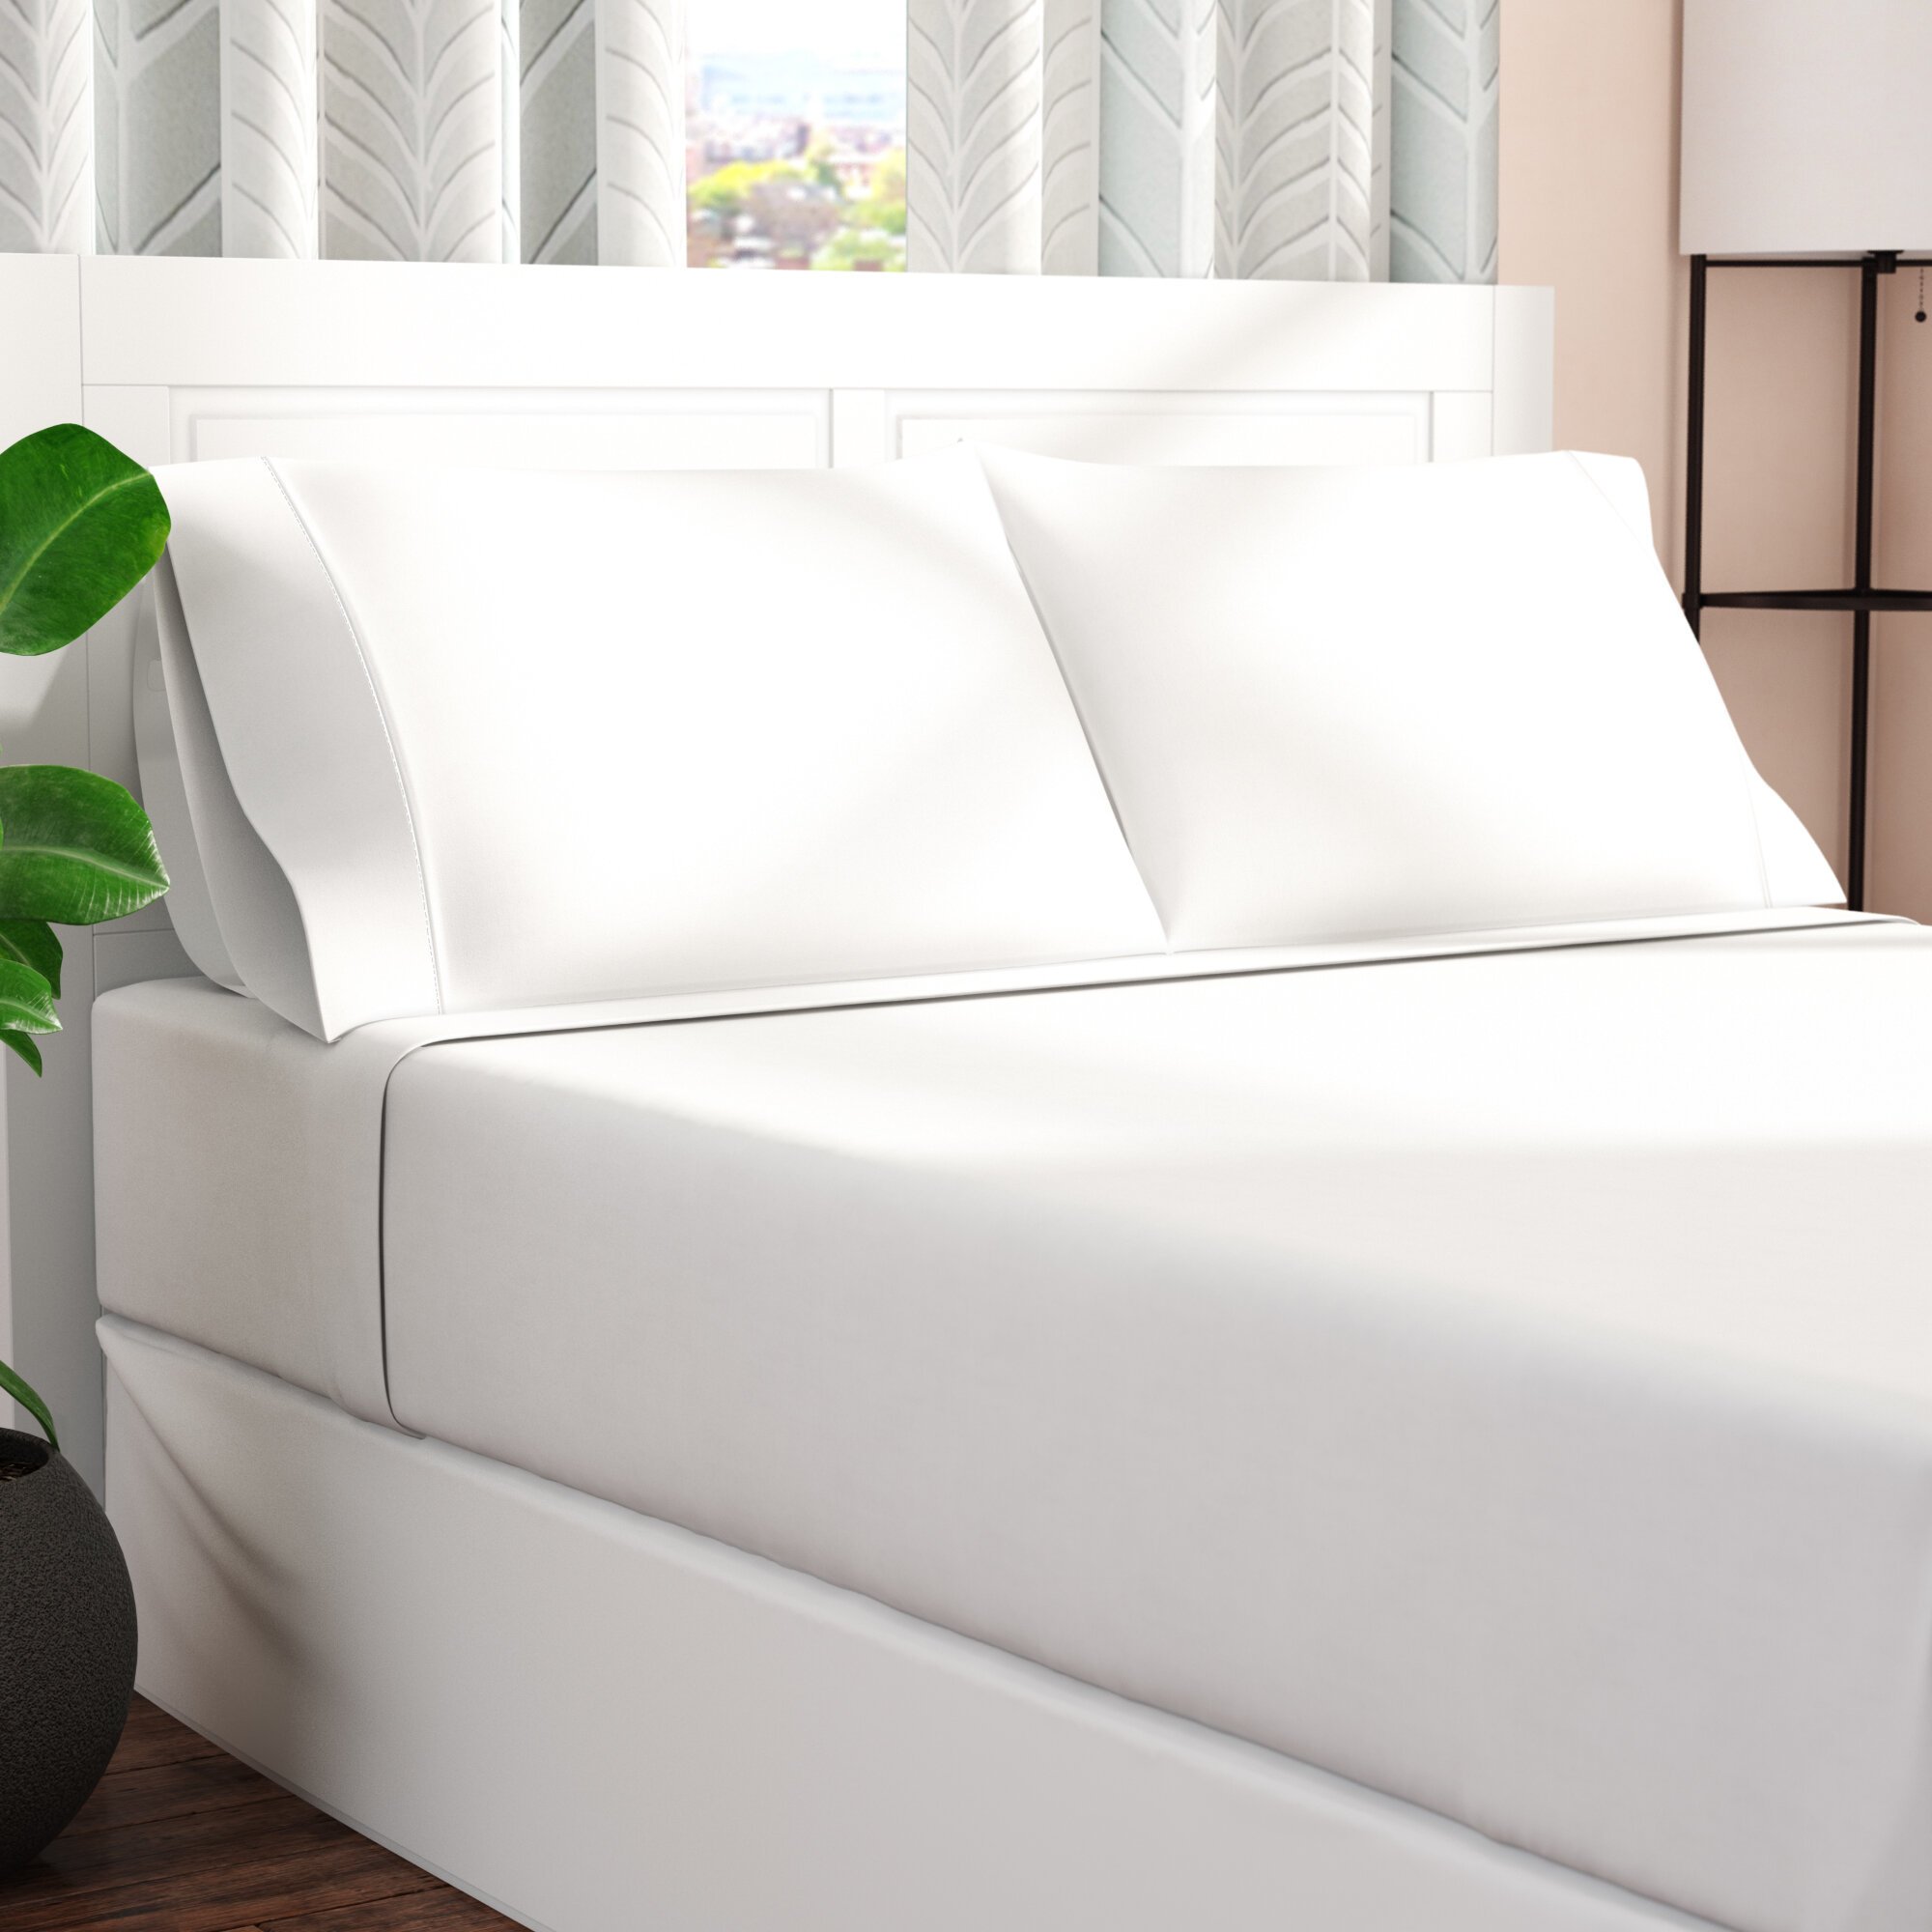 Full XL , White 1200 Thread Count 25 inches Extra Deep Pocket 100% ...